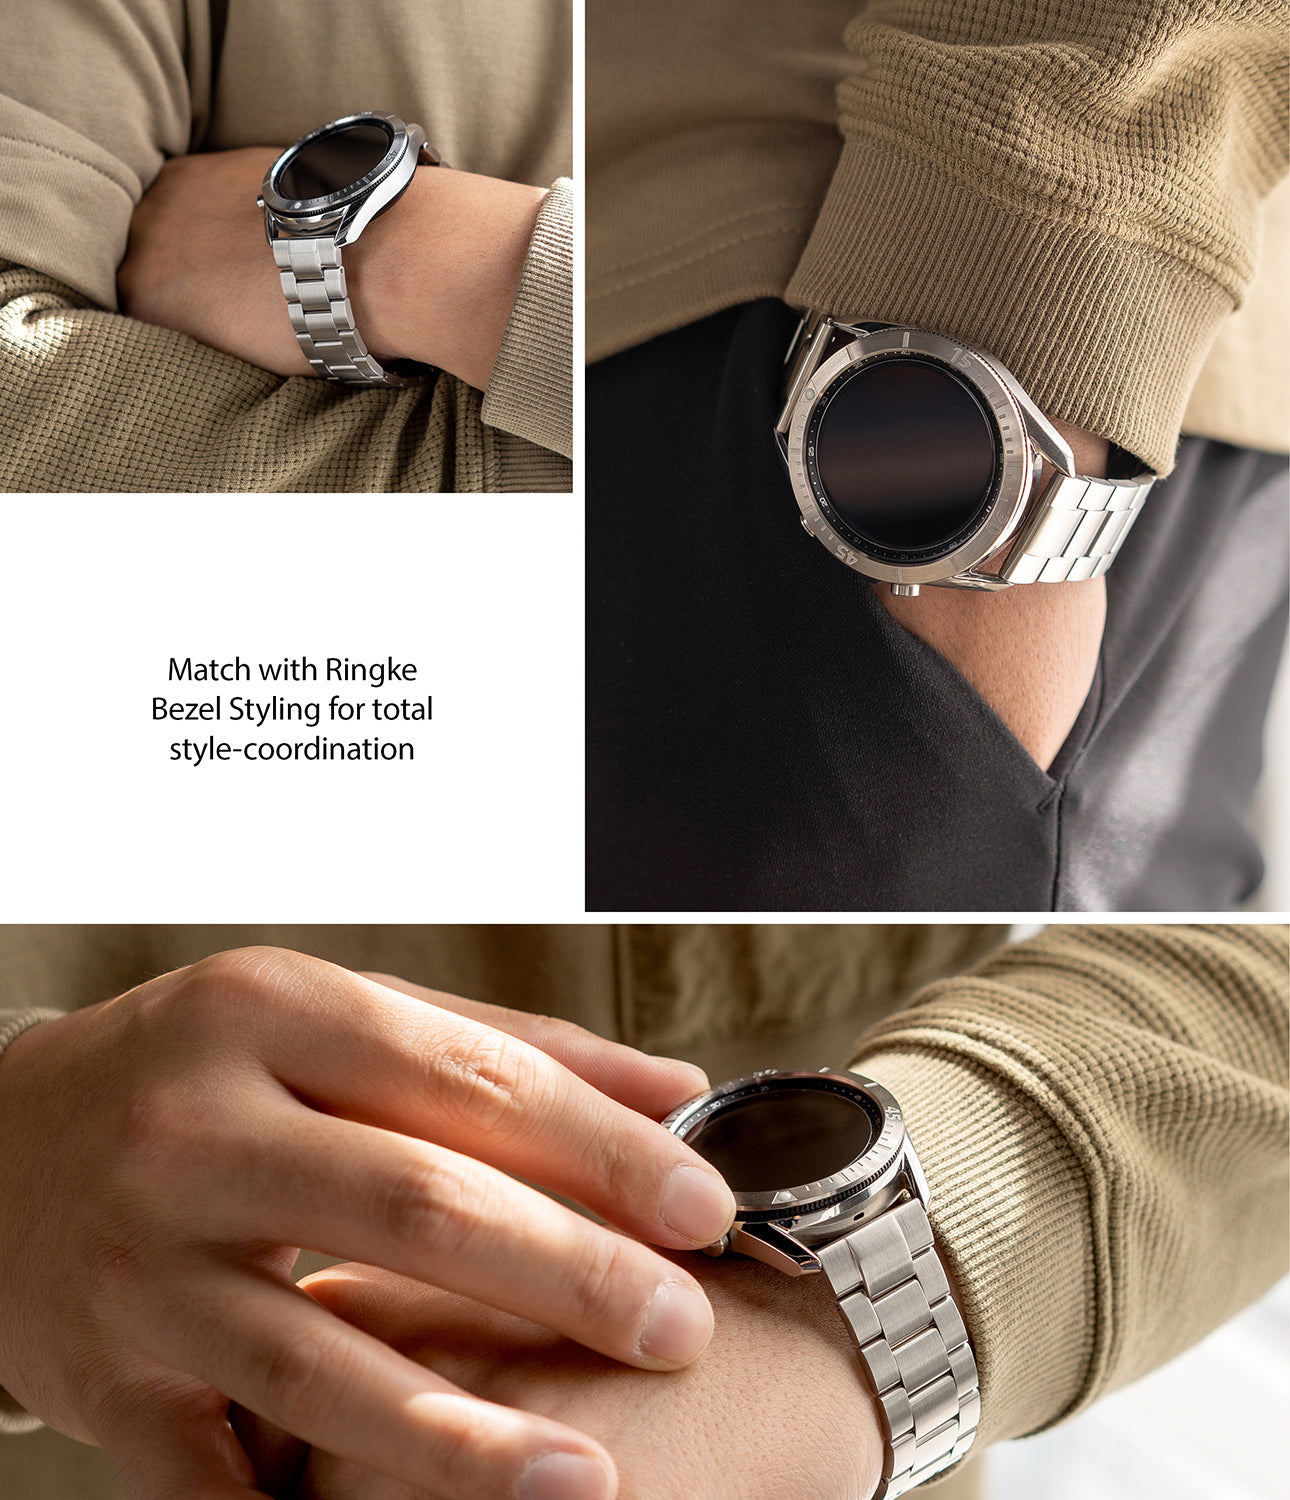 match with ringke bezel styling for total style-coordination